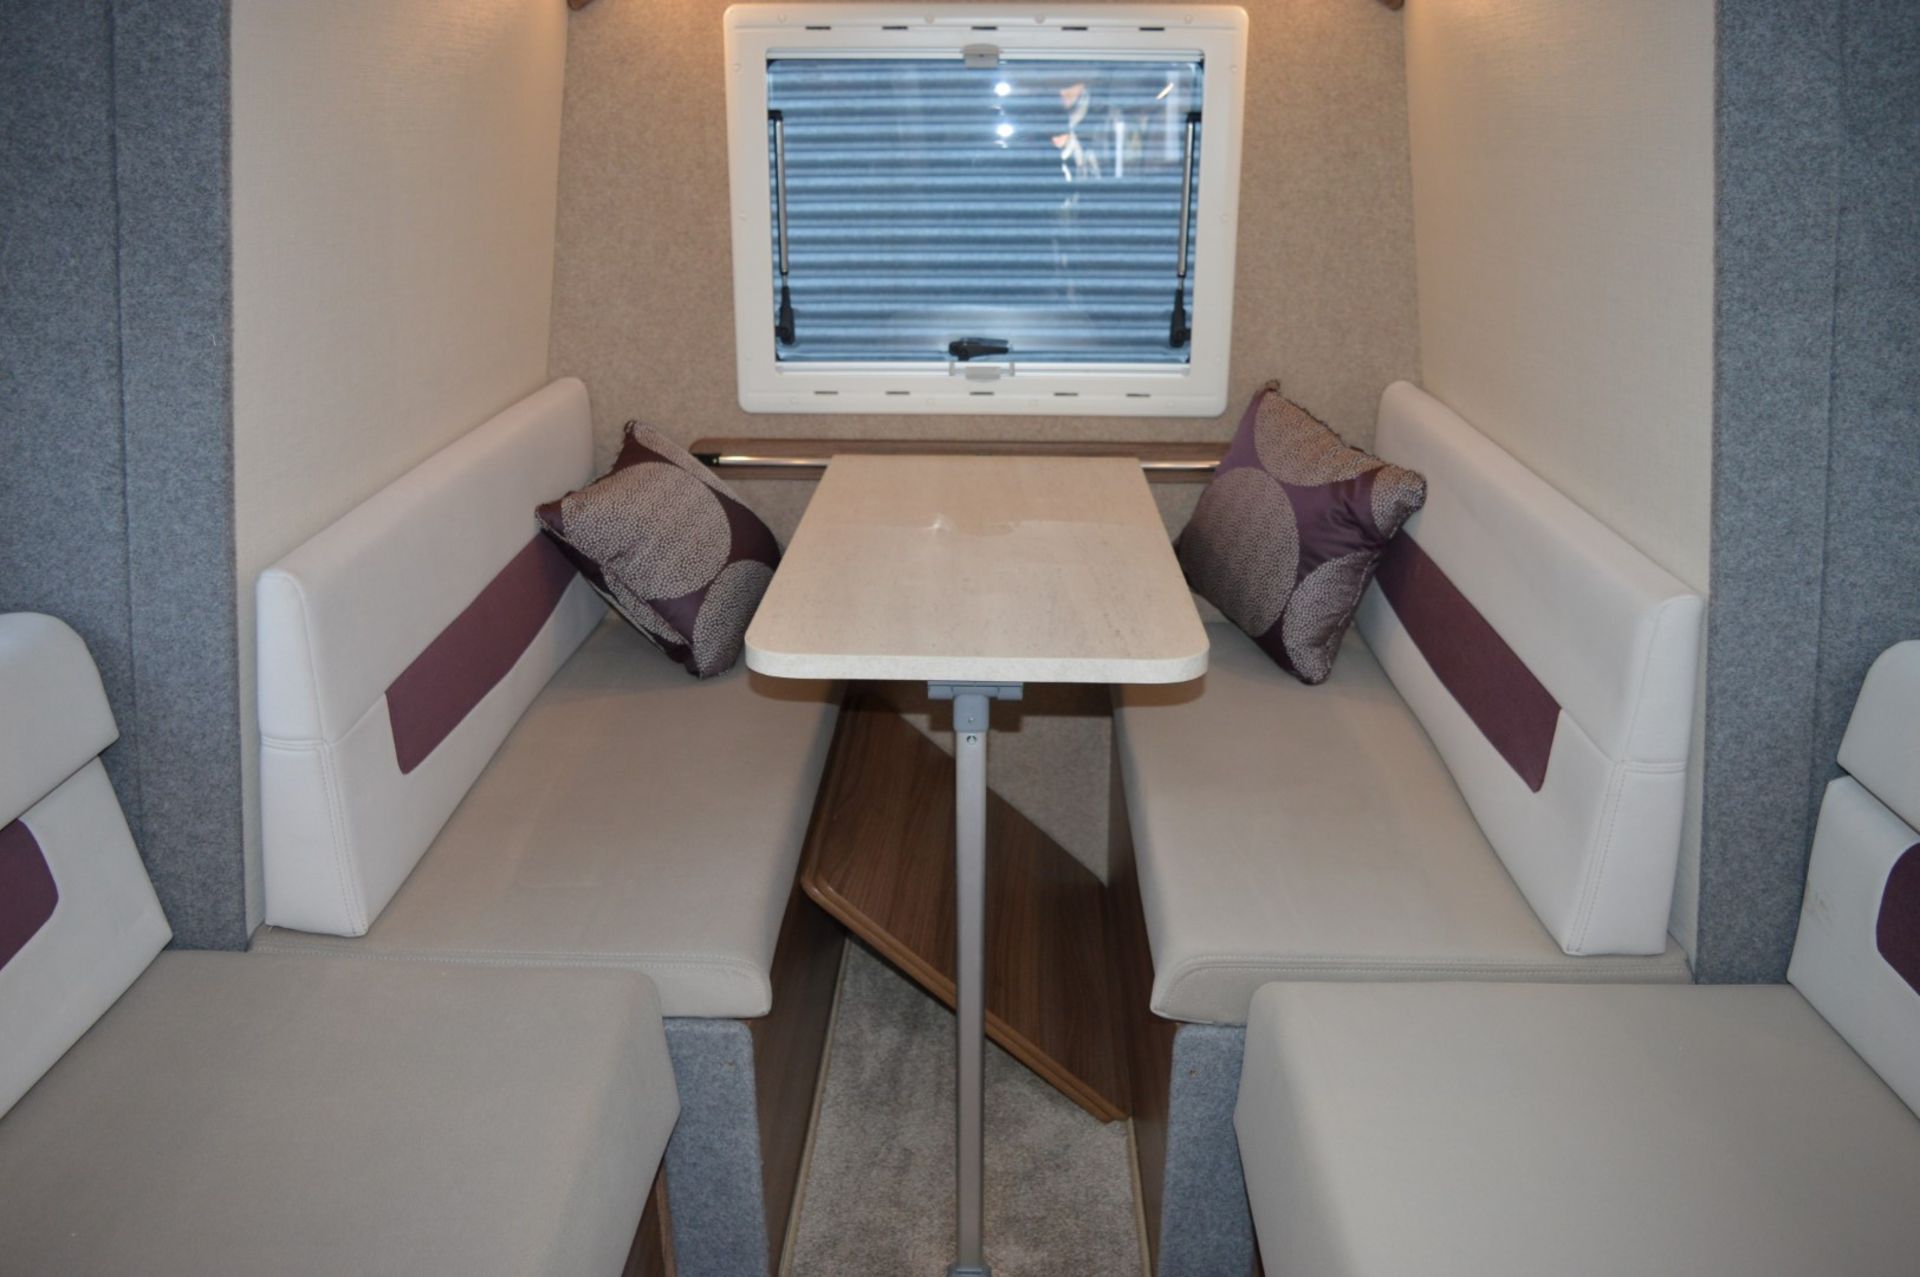 1 x Lunar Renault S Edition Marira X Trend Campervan With Slideout - Image 27 of 31